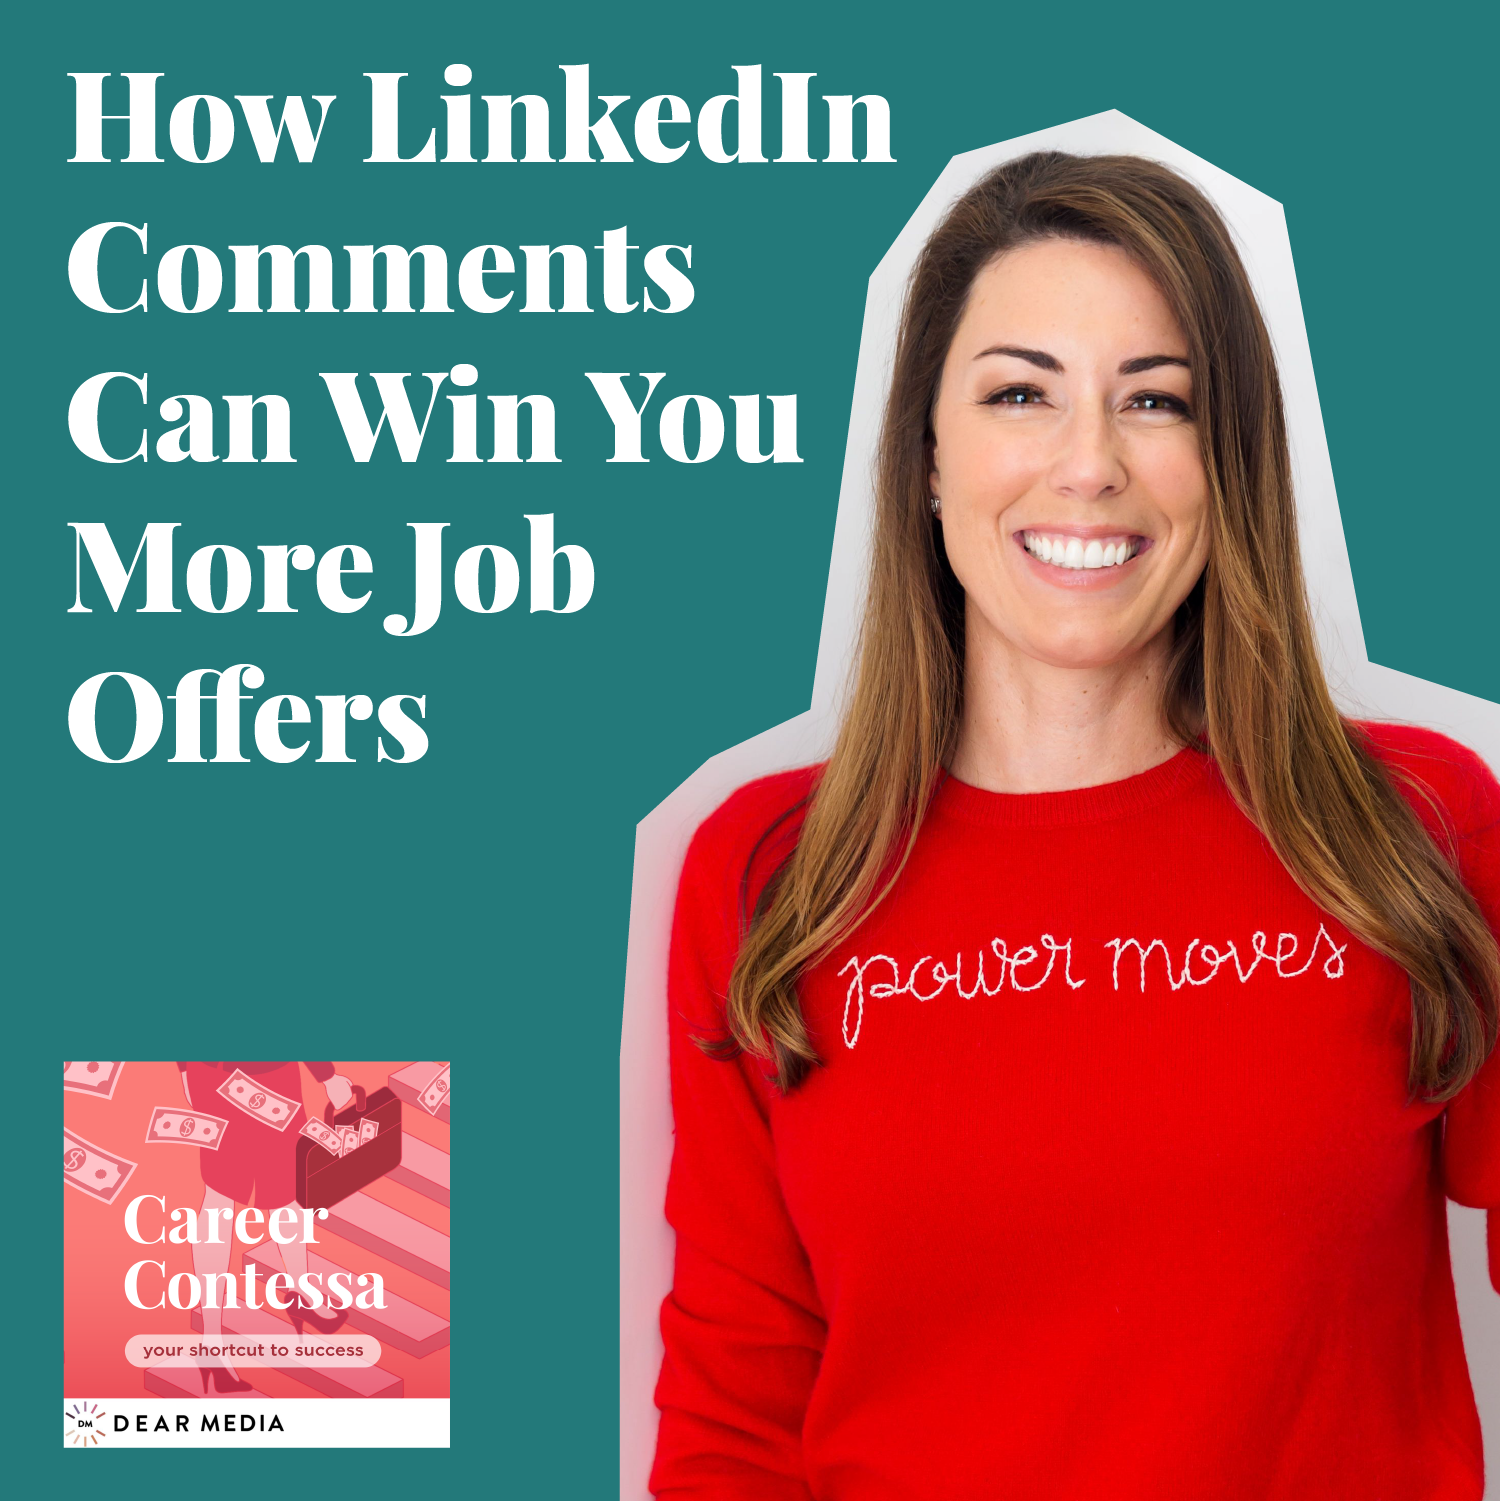 How LinkedIn Comments Can Win You More Job Offers Image